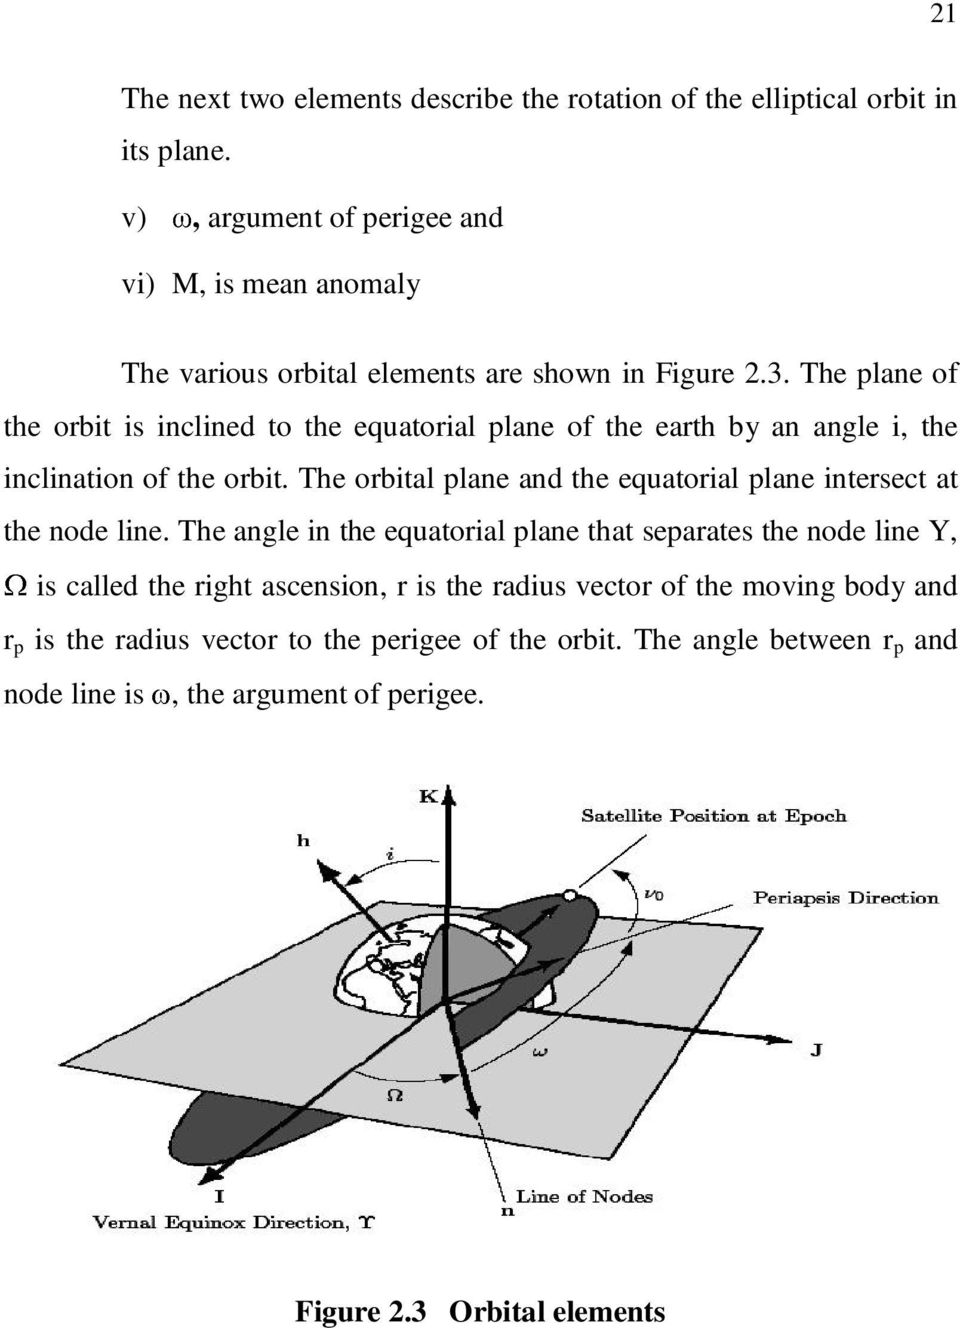 The plane of the orbit is inclined to the equatorial plane of the earth by an angle i, the inclination of the orbit.